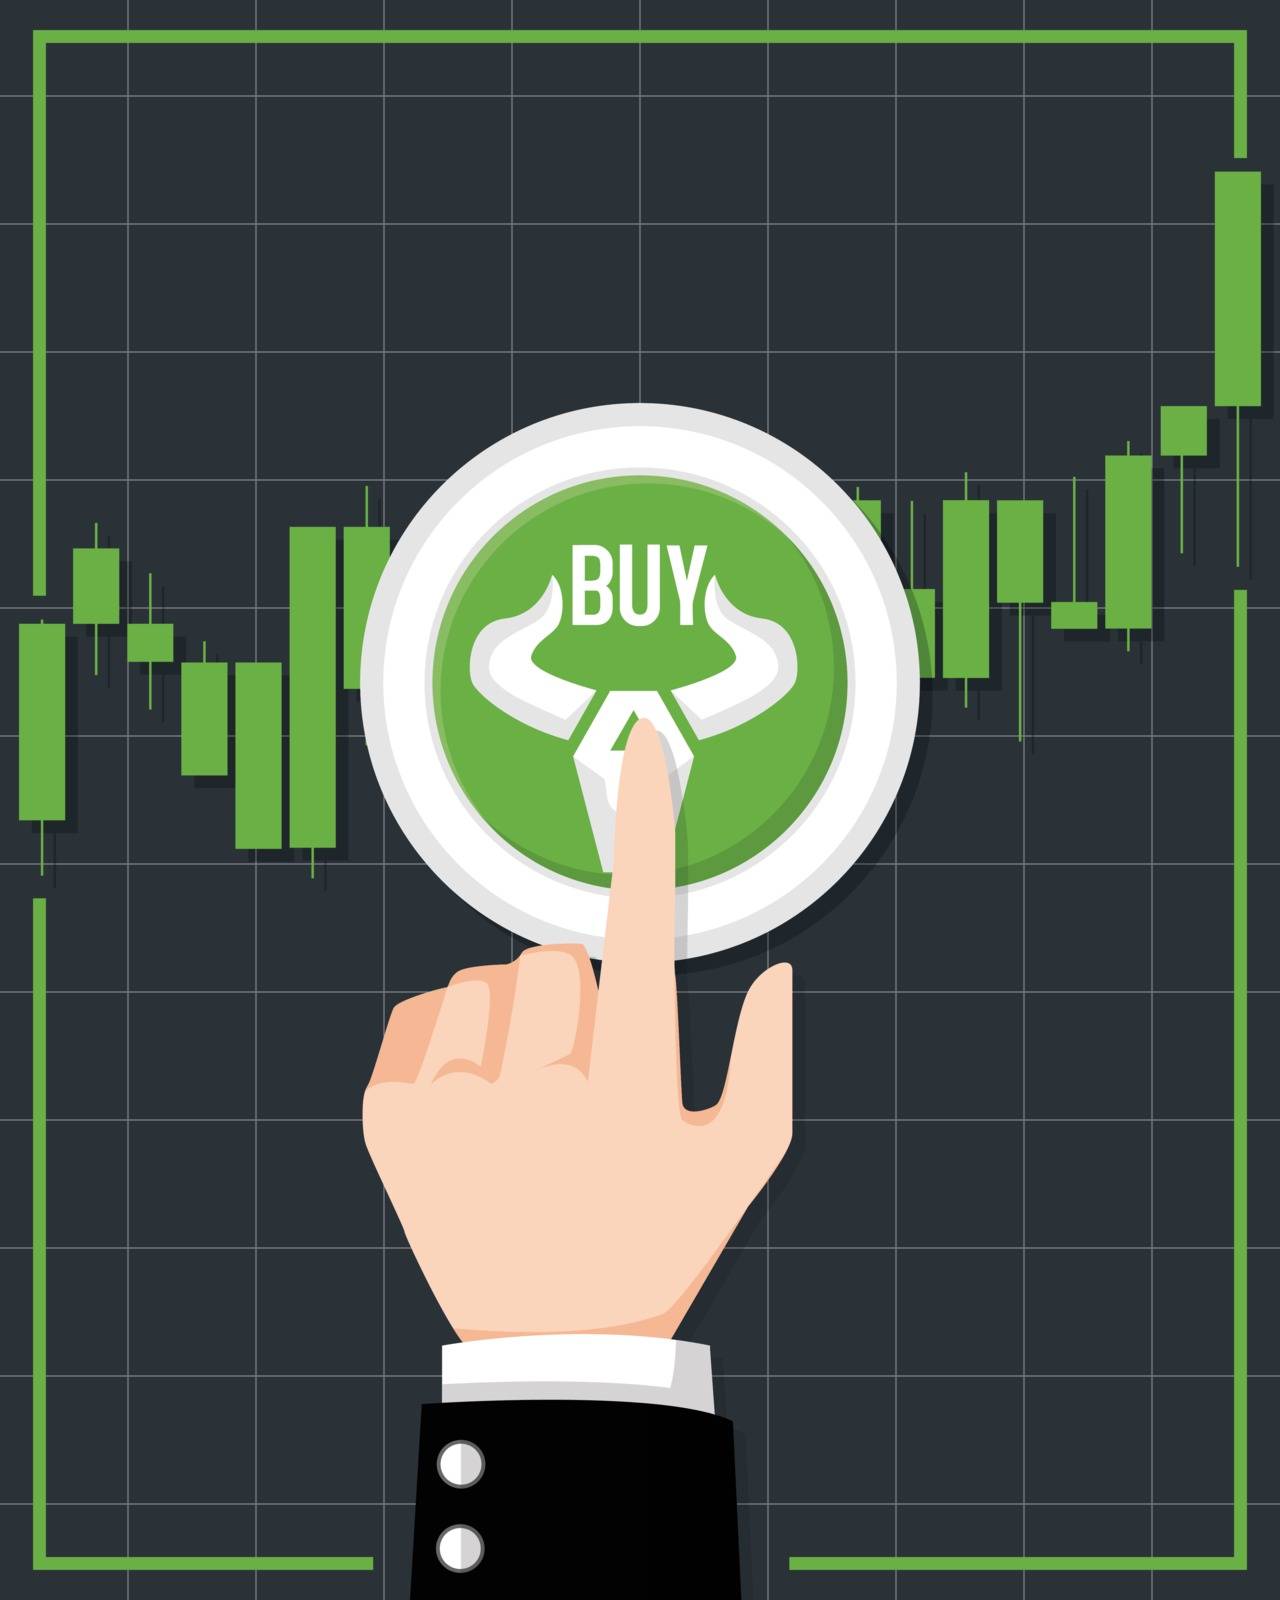 Bullish stock market vector. Fund, forex or commodity price charts. Design by financial chart elements and business man push buy botton with bull symbol, growing investment trading. Up trend concept by foxeel